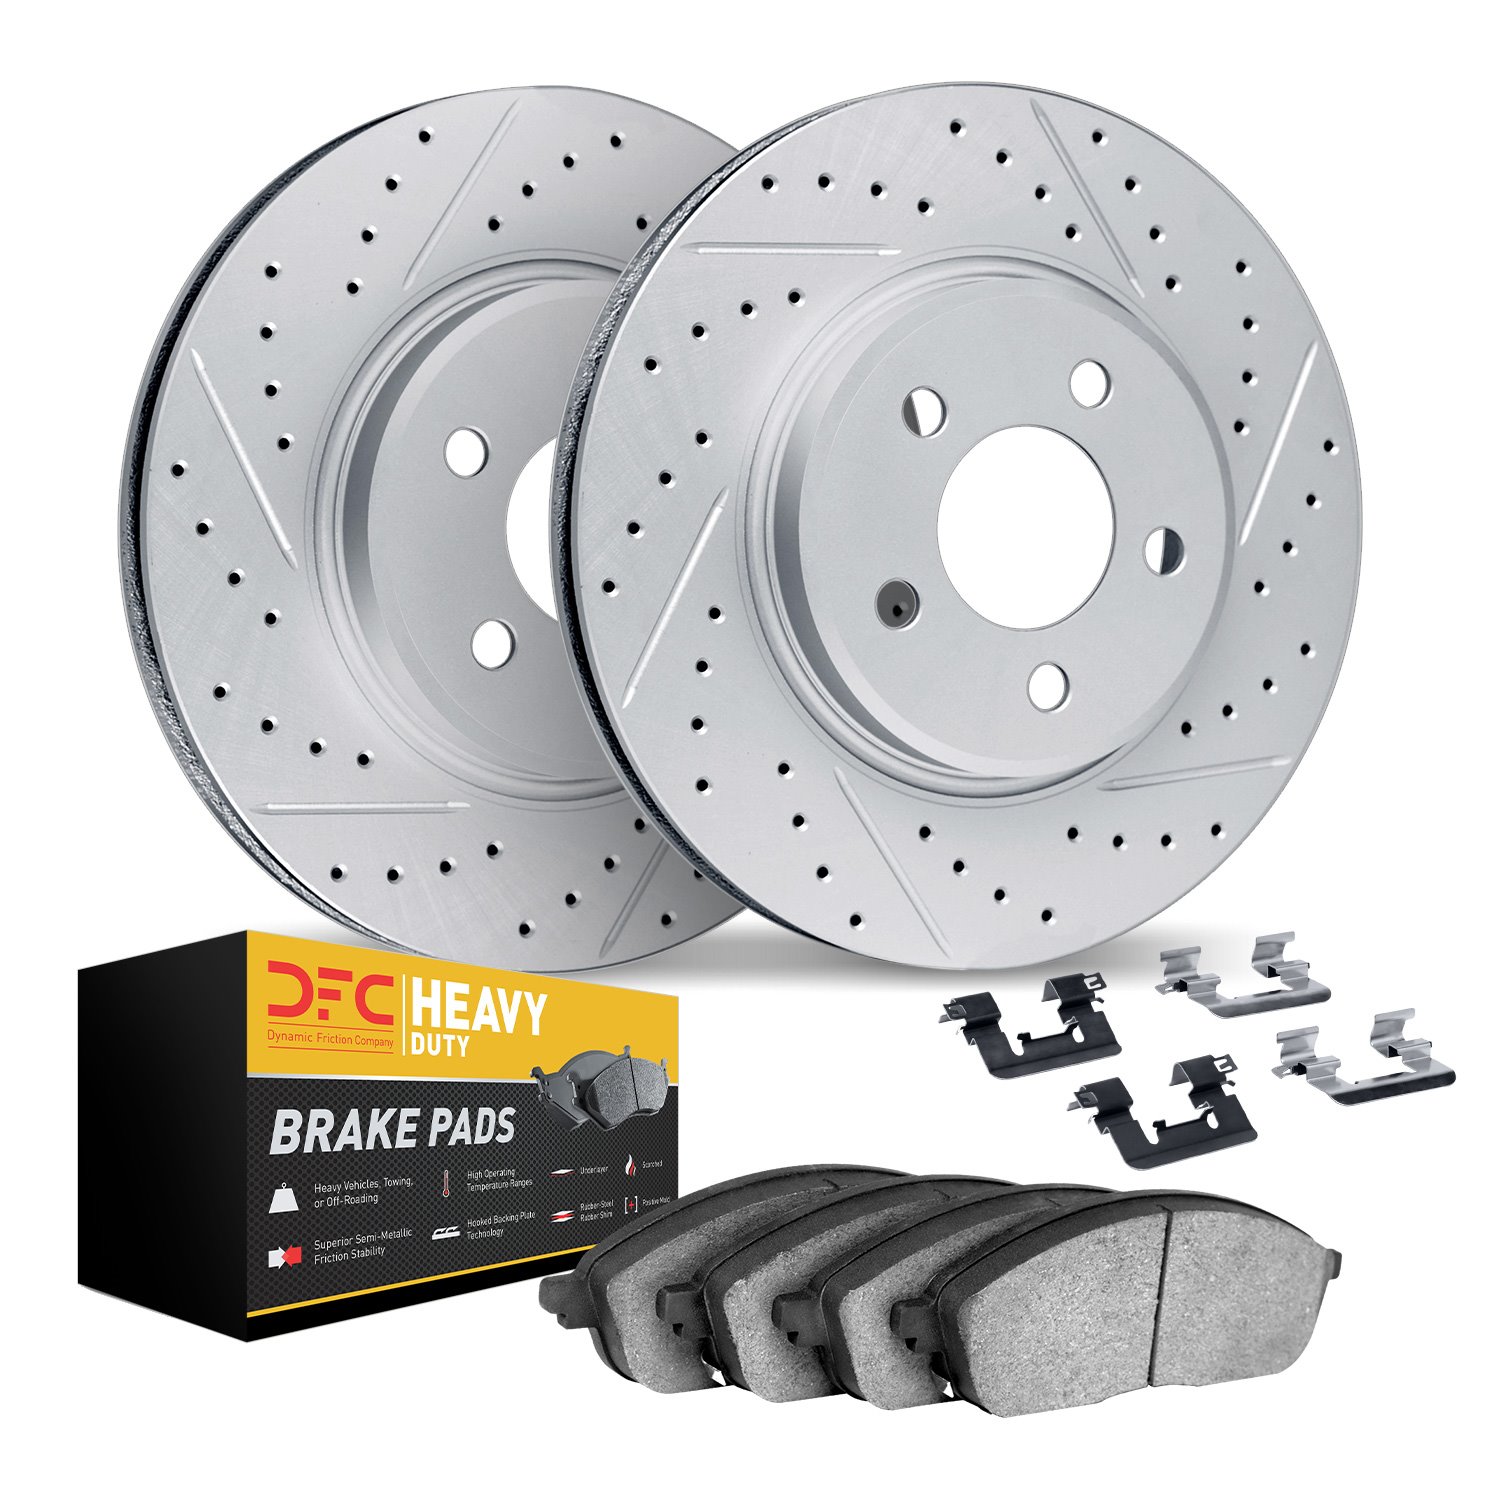 2212-99094 Geoperformance Drilled/Slotted Rotors w/Heavy-Duty Pads Kit & Hardware, 1997-1999 Ford/Lincoln/Mercury/Mazda, Positio